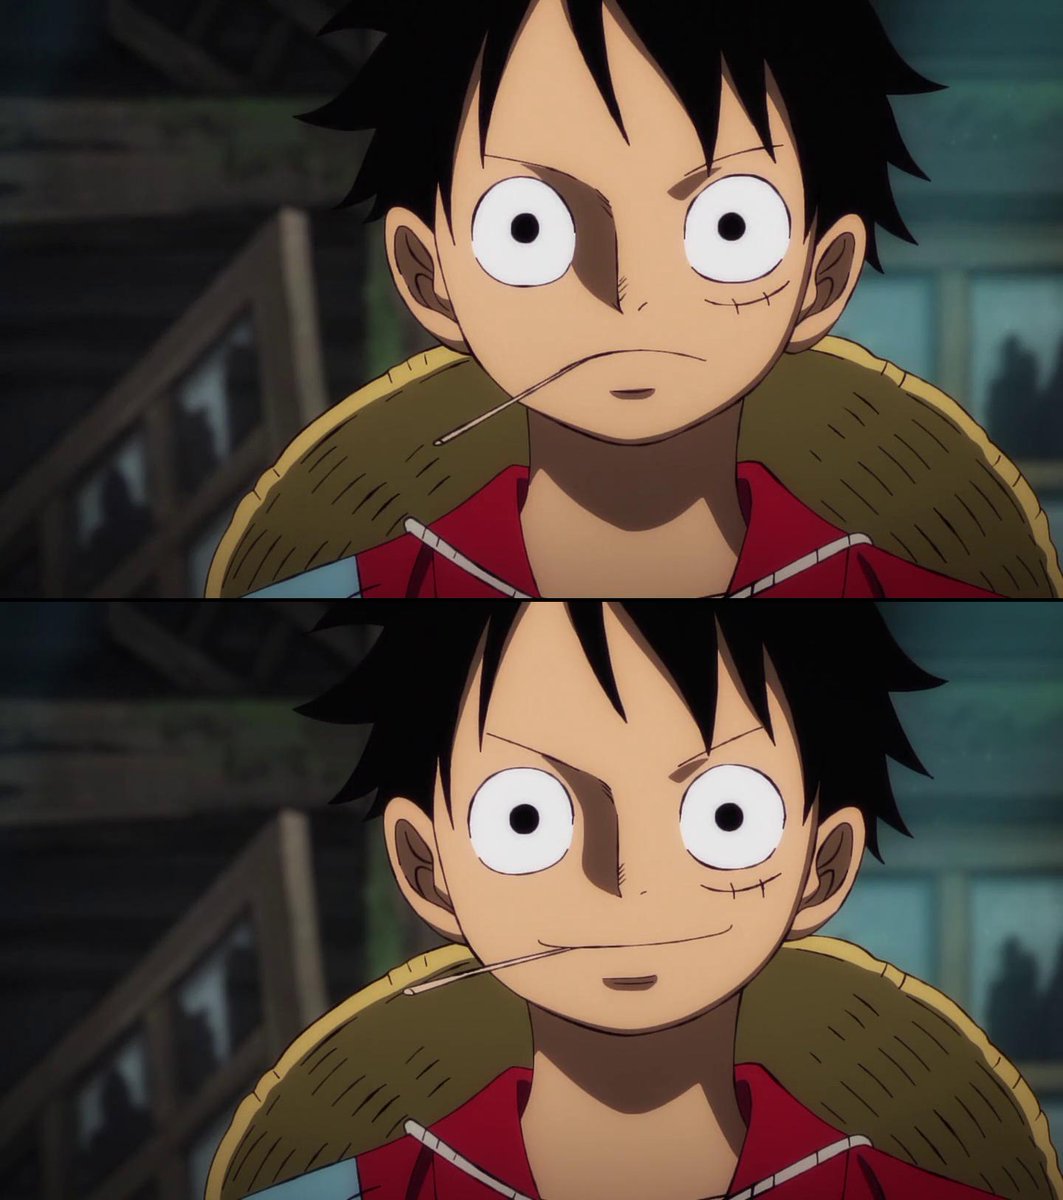 One Piece Blessing Your Feed With Luffy S Smile To Brighten Up Your Day Via Episode 911